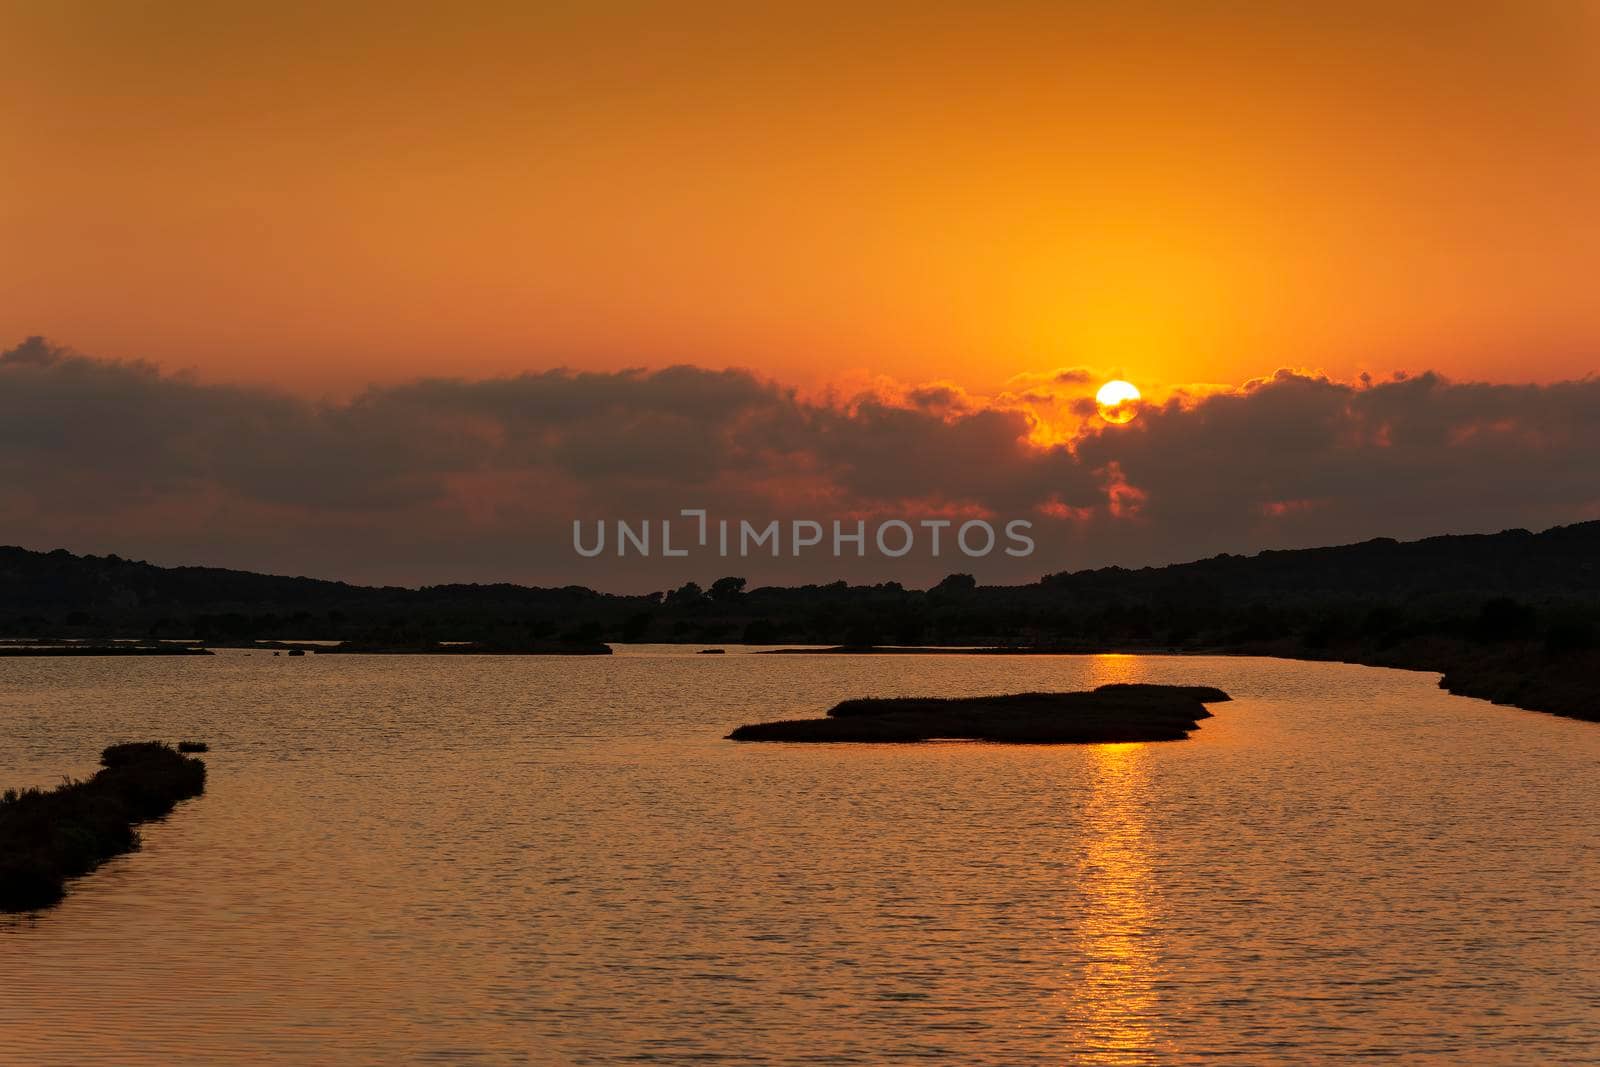 Sunset at the gialova lagoon. The gialova lagoon is one of the most important wetlands in Europe. by ankarb